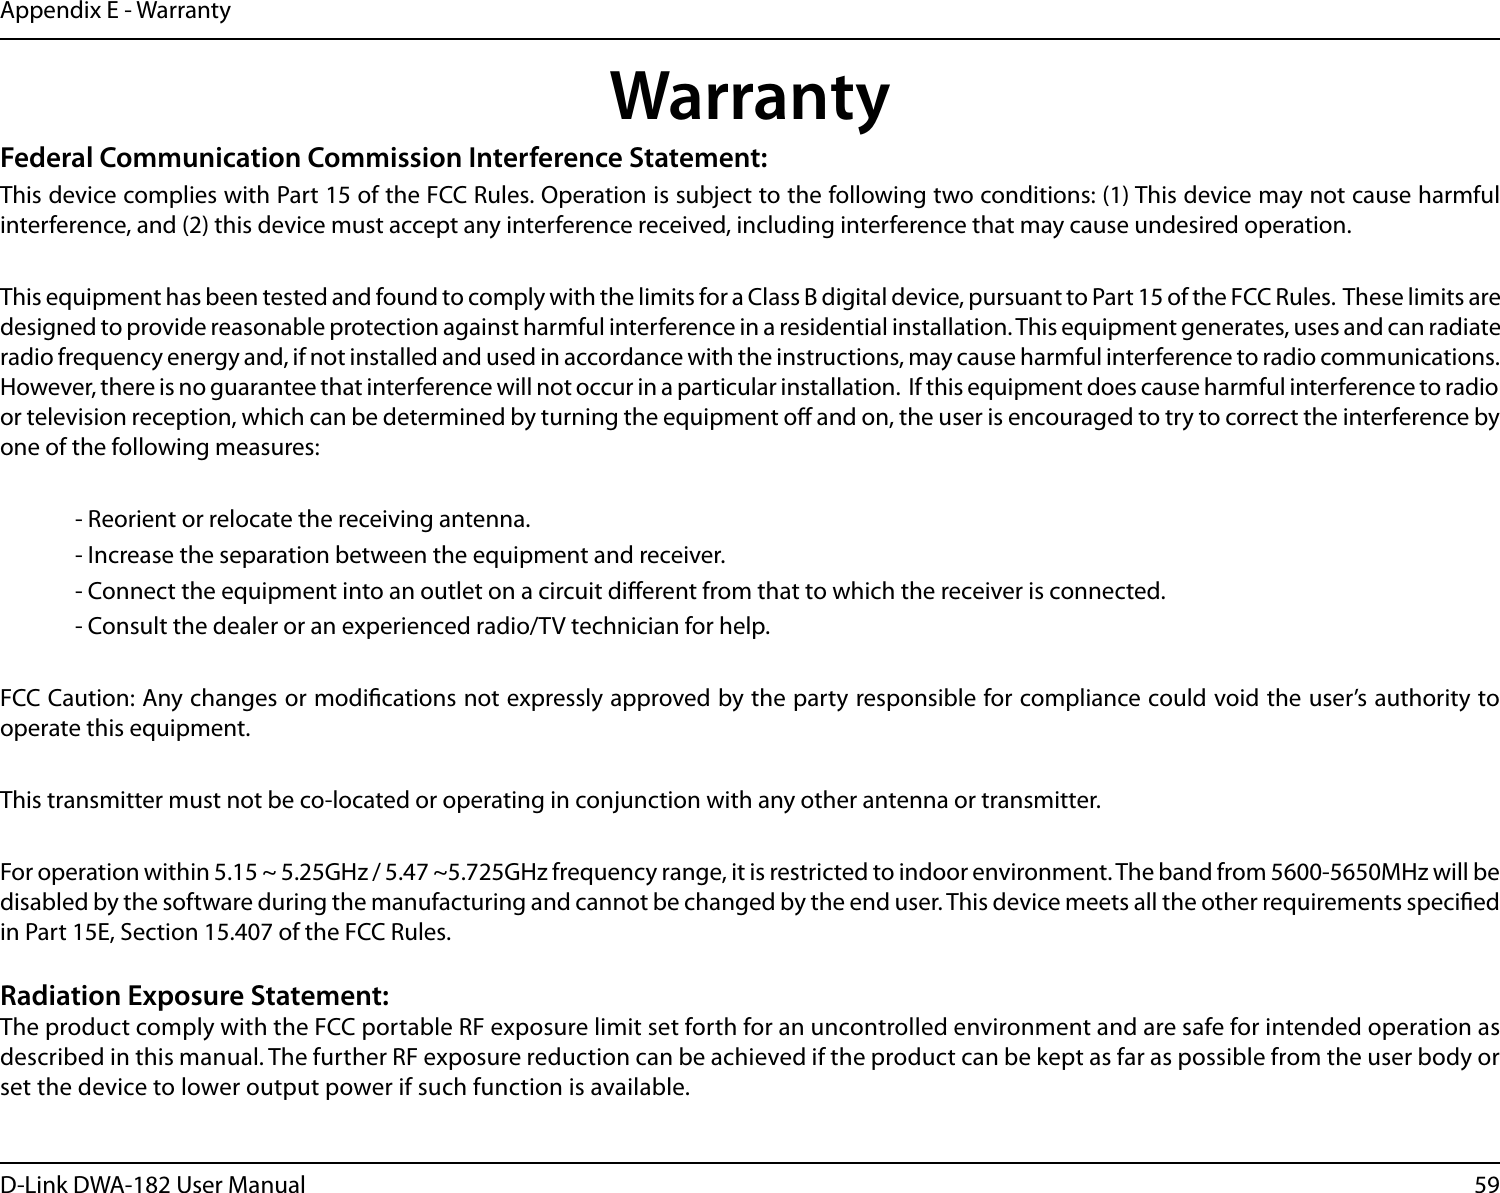 59D-Link DWA-182 User ManualAppendix E - WarrantyWarrantyFederal Communication Commission Interference Statement:This device complies with Part 15 of the FCC Rules. Operation is subject to the following two conditions: (1) This device may not cause harmful interference, and (2) this device must accept any interference received, including interference that may cause undesired operation. This equipment has been tested and found to comply with the limits for a Class B digital device, pursuant to Part 15 of the FCC Rules.  These limits are designed to provide reasonable protection against harmful interference in a residential installation. This equipment generates, uses and can radiate radio frequency energy and, if not installed and used in accordance with the instructions, may cause harmful interference to radio communications.  However, there is no guarantee that interference will not occur in a particular installation.  If this equipment does cause harmful interference to radio or television reception, which can be determined by turning the equipment o and on, the user is encouraged to try to correct the interference by one of the following measures:   - Reorient or relocate the receiving antenna.  - Increase the separation between the equipment and receiver.  - Connect the equipment into an outlet on a circuit dierent from that to which the receiver is connected.  - Consult the dealer or an experienced radio/TV technician for help. FCC Caution: Any changes or modications not expressly approved by the party responsible for compliance could void the user’s authority to operate this equipment.This transmitter must not be co-located or operating in conjunction with any other antenna or transmitter.For operation within 5.15 ~ 5.25GHz / 5.47 ~5.725GHz frequency range, it is restricted to indoor environment. The band from 5600-5650MHz will be disabled by the software during the manufacturing and cannot be changed by the end user. This device meets all the other requirements specied in Part 15E, Section 15.407 of the FCC Rules.Radiation Exposure Statement:The product comply with the FCC portable RF exposure limit set forth for an uncontrolled environment and are safe for intended operation as described in this manual. The further RF exposure reduction can be achieved if the product can be kept as far as possible from the user body or set the device to lower output power if such function is available.